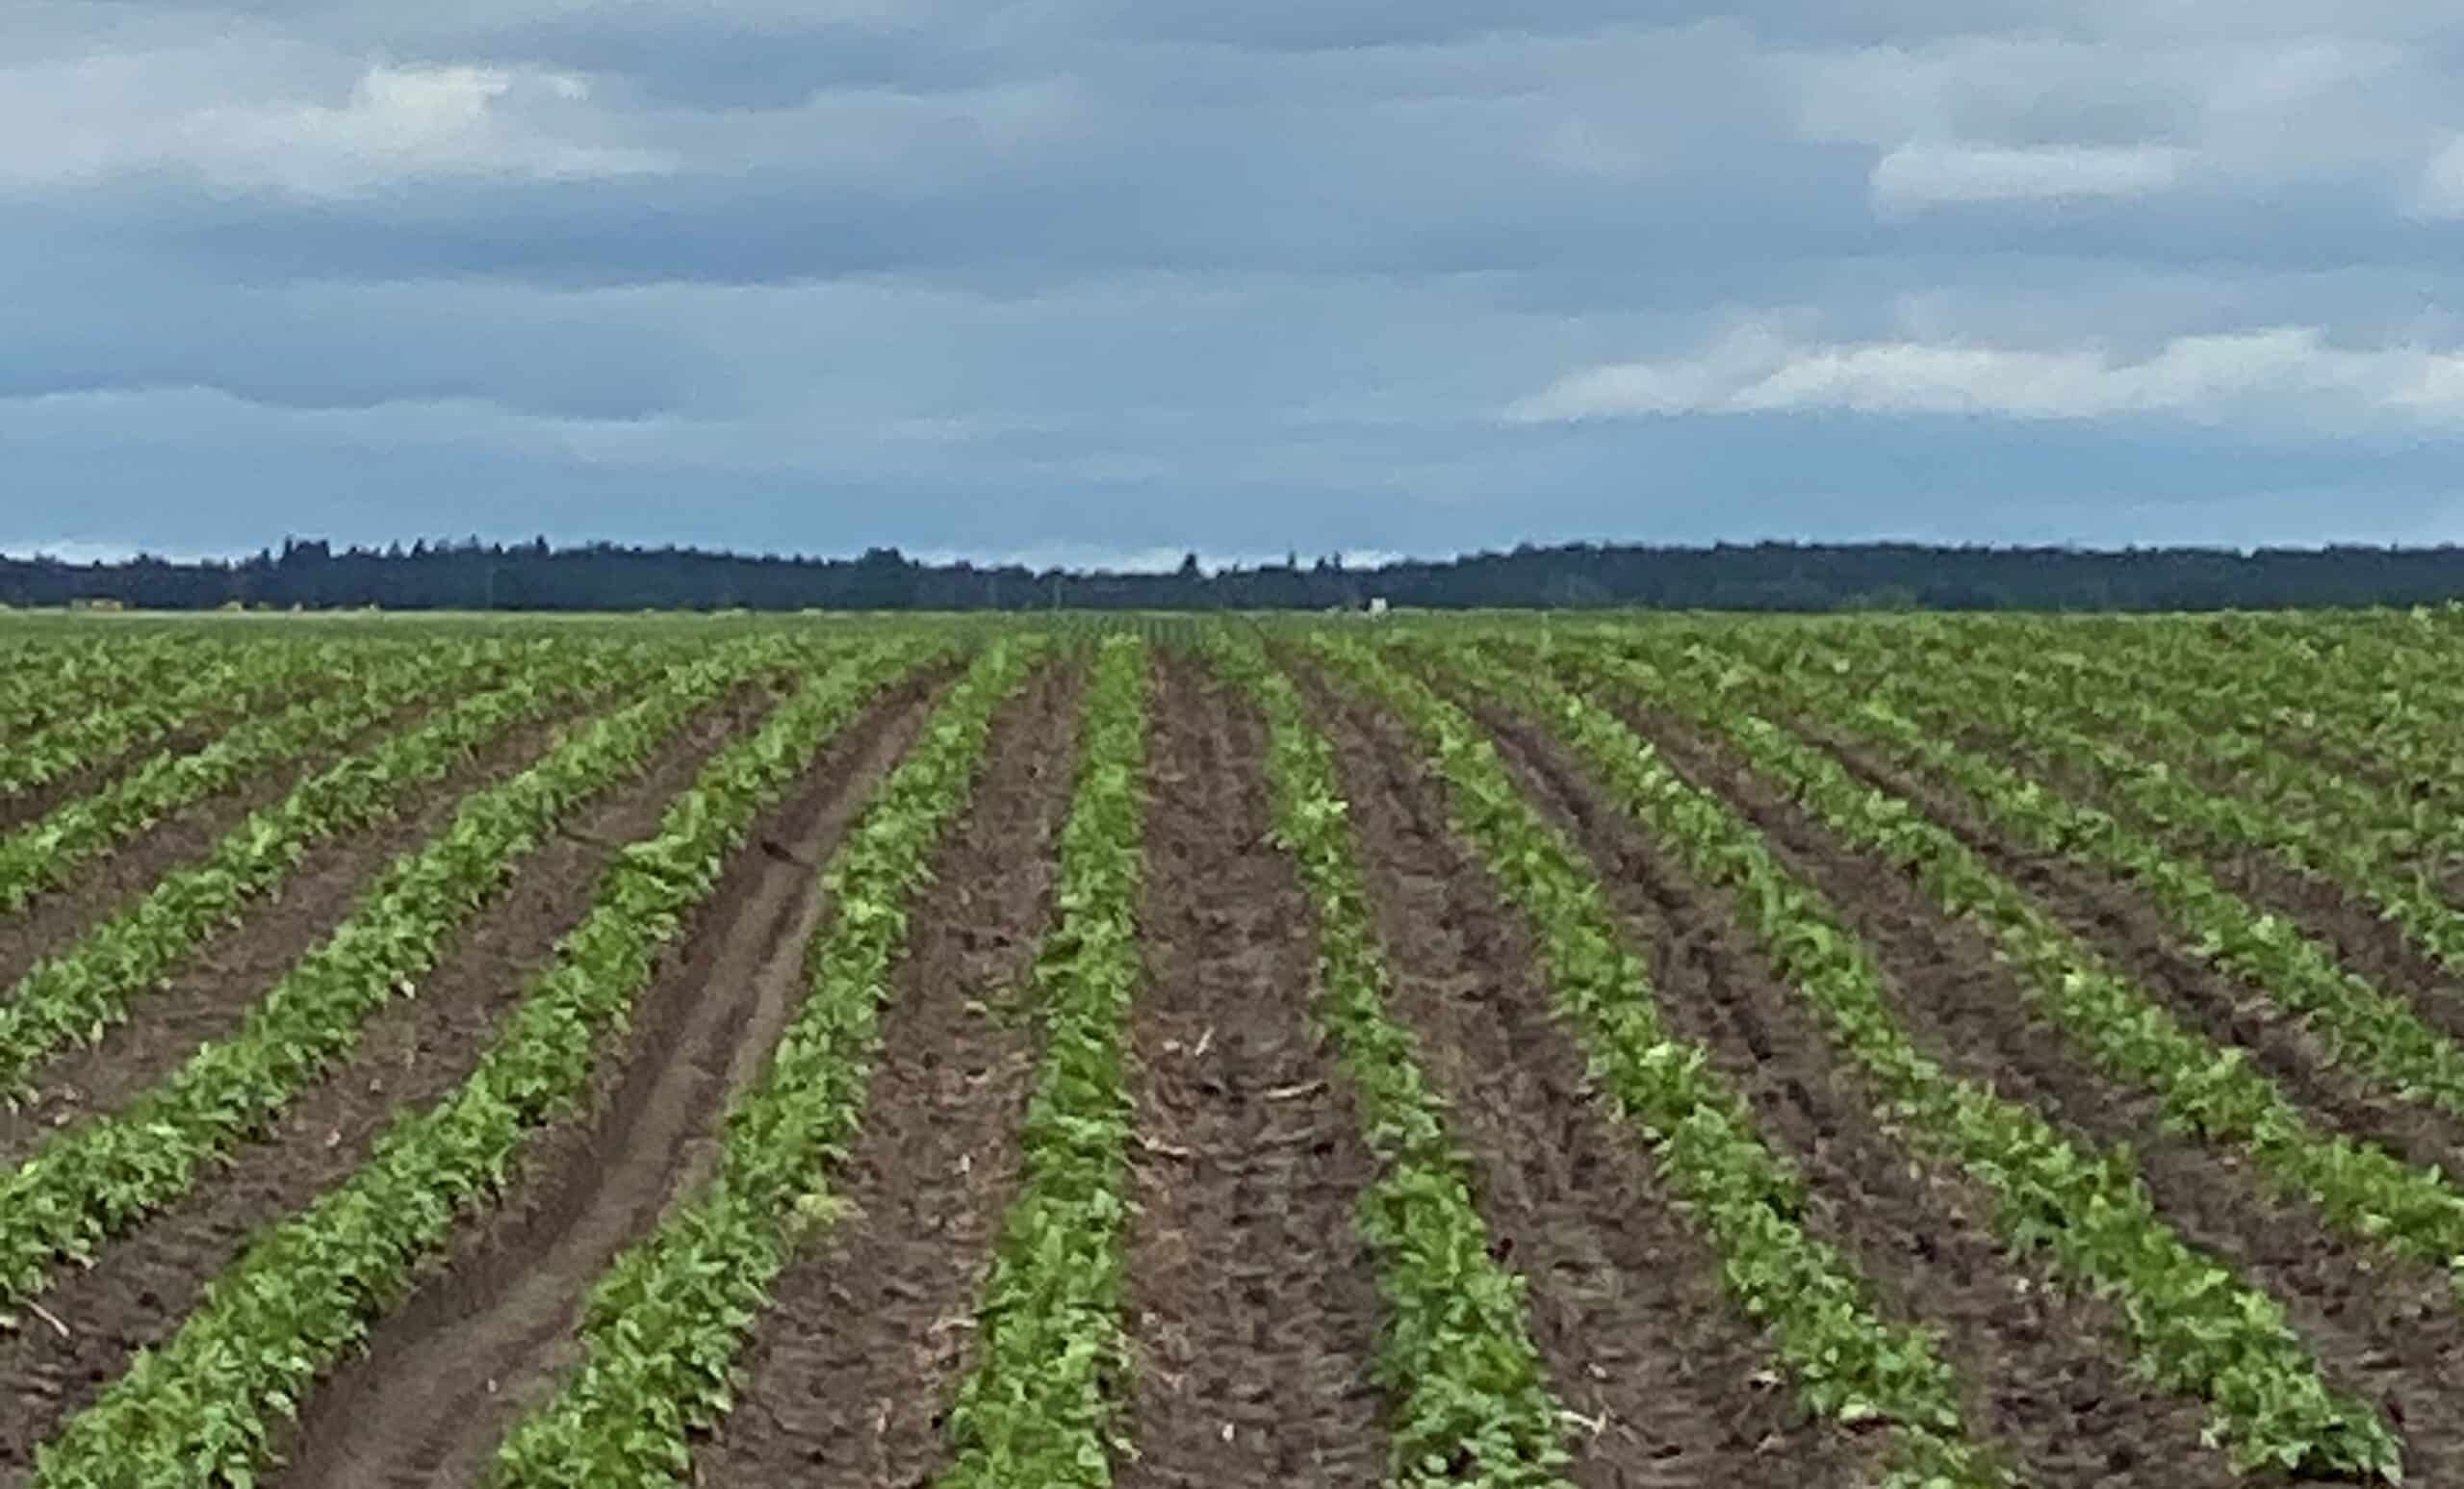 Newly emerged rows of potatoes